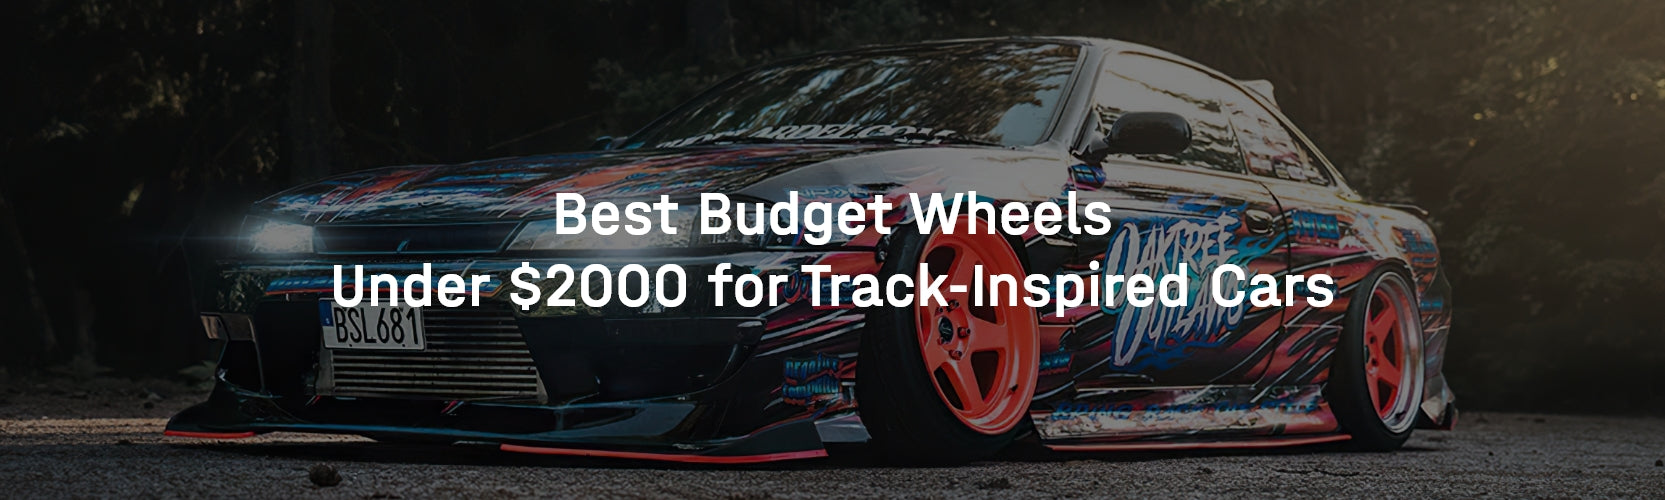 Buyer's Guide: Best Budget Wheels Under $2000 for Track-Inspired Cars